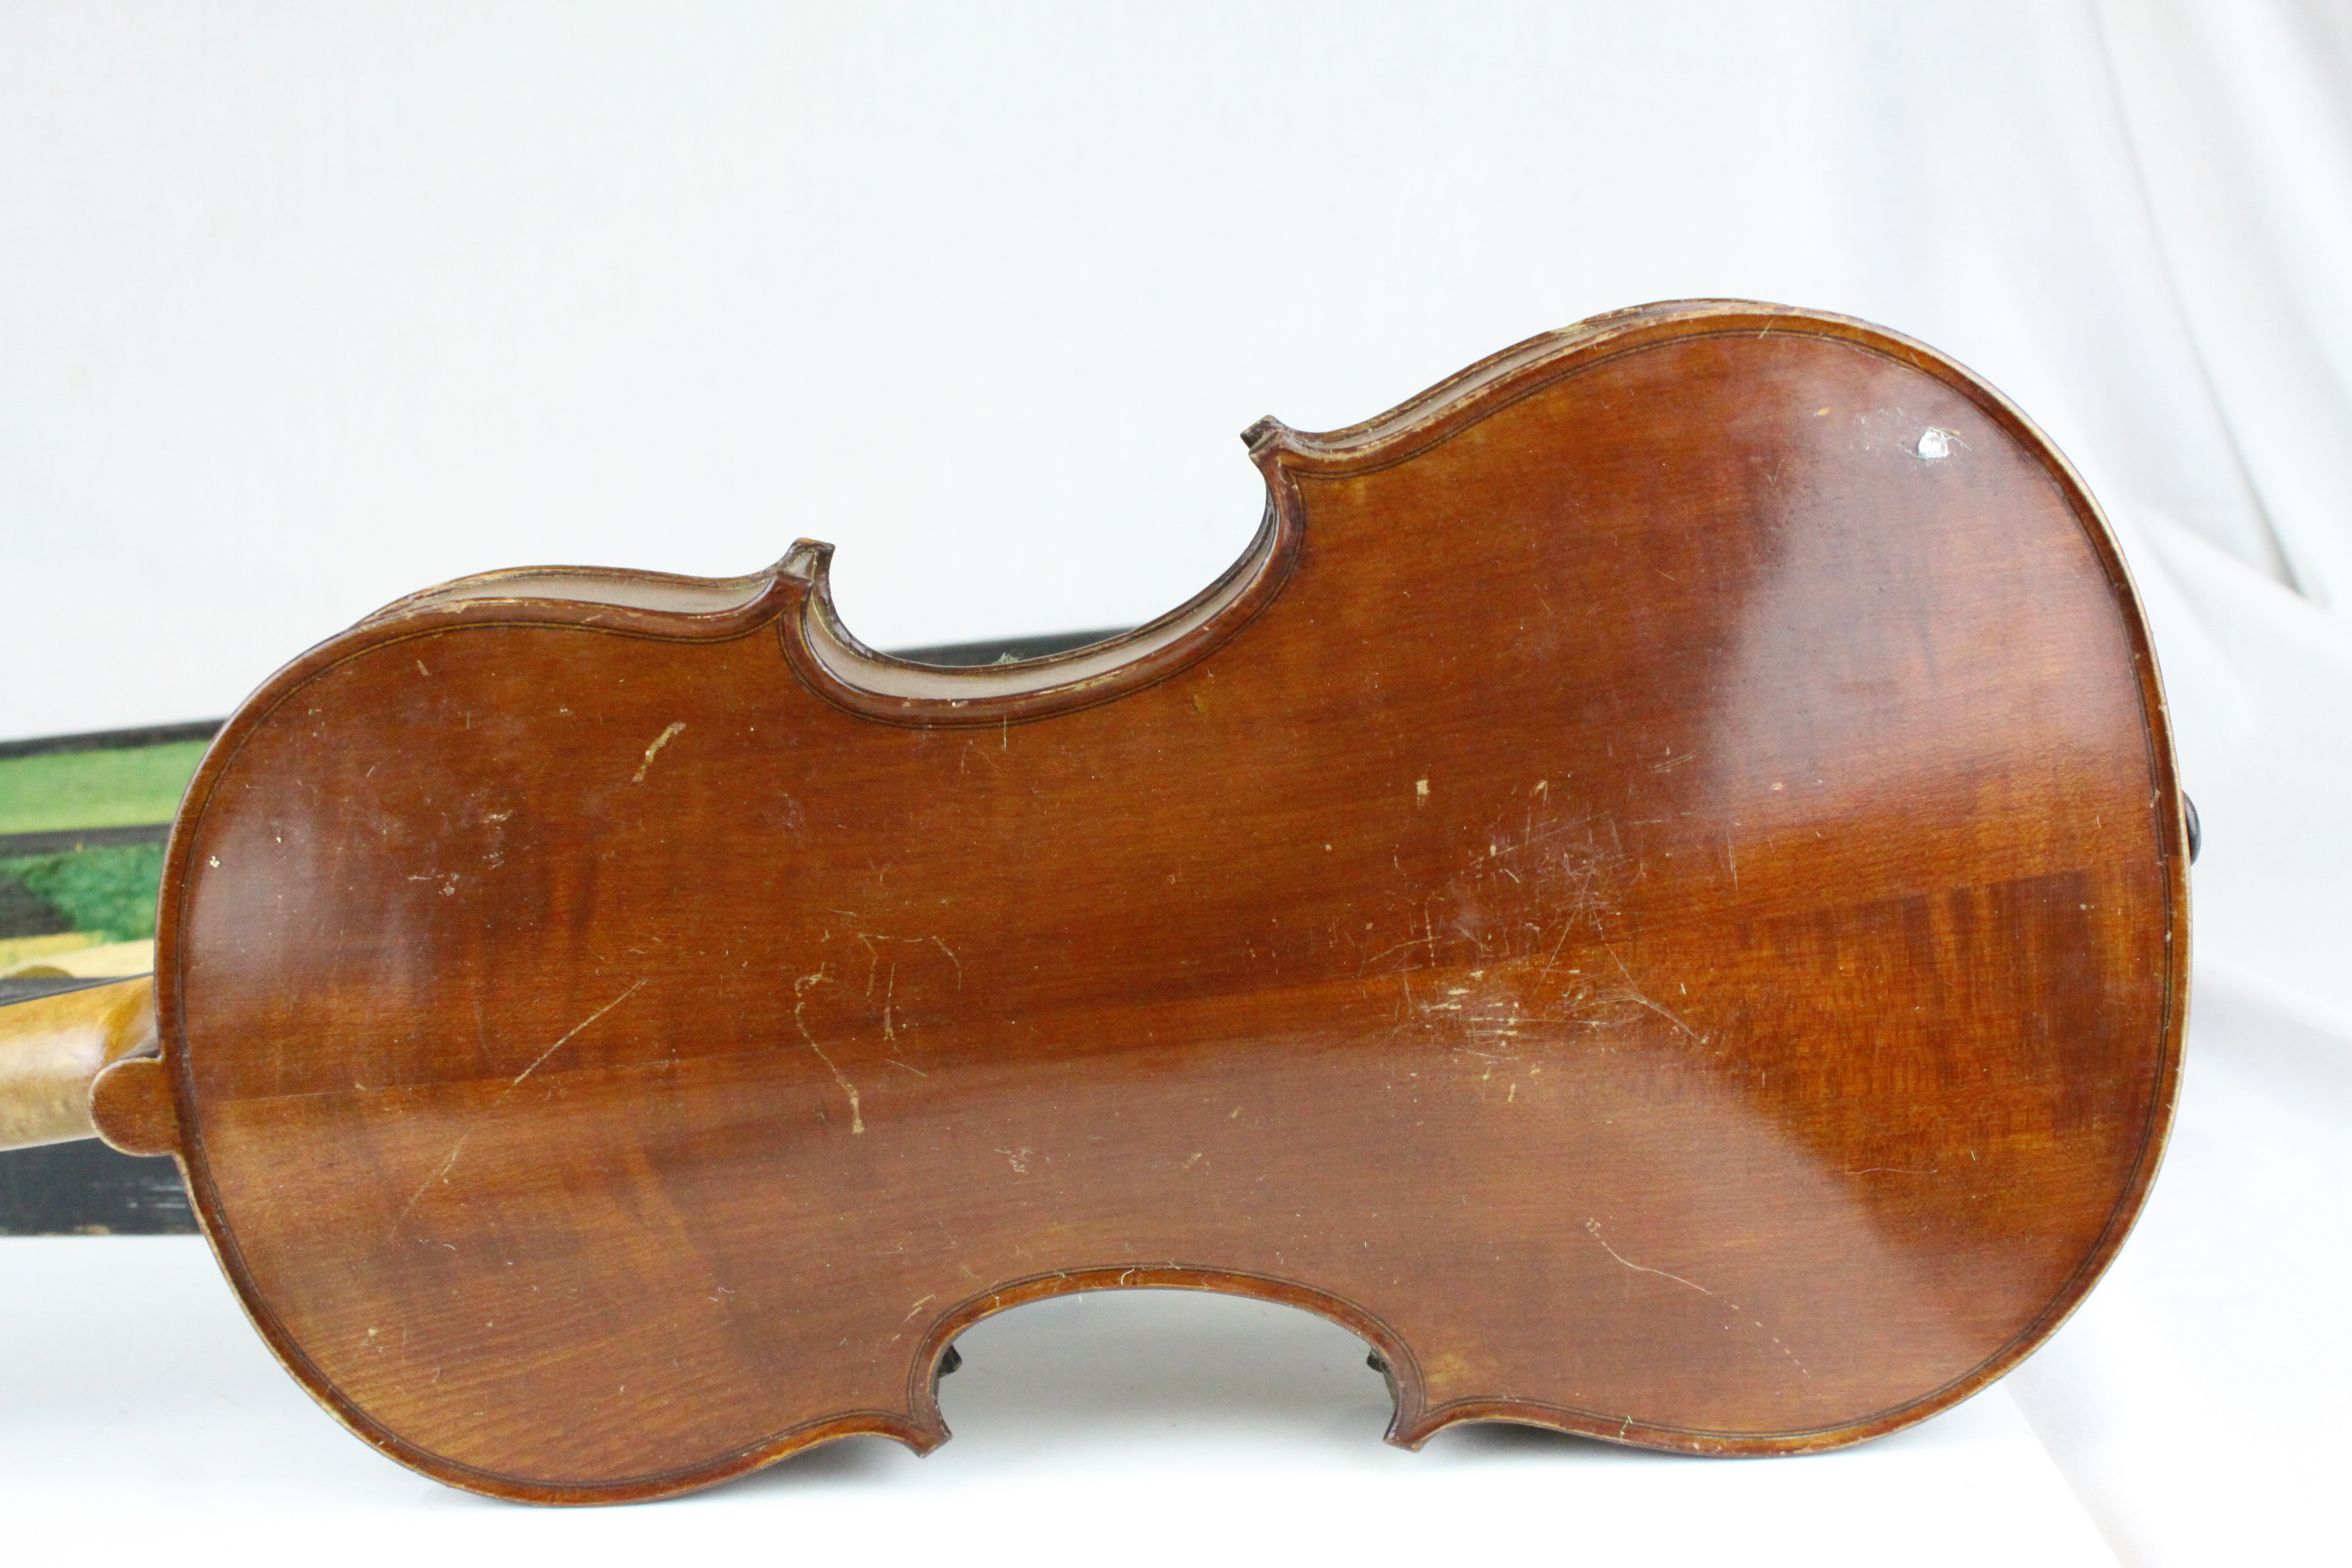 Violin and Bow (both a/f) in Wooden Violin Case - Image 9 of 9